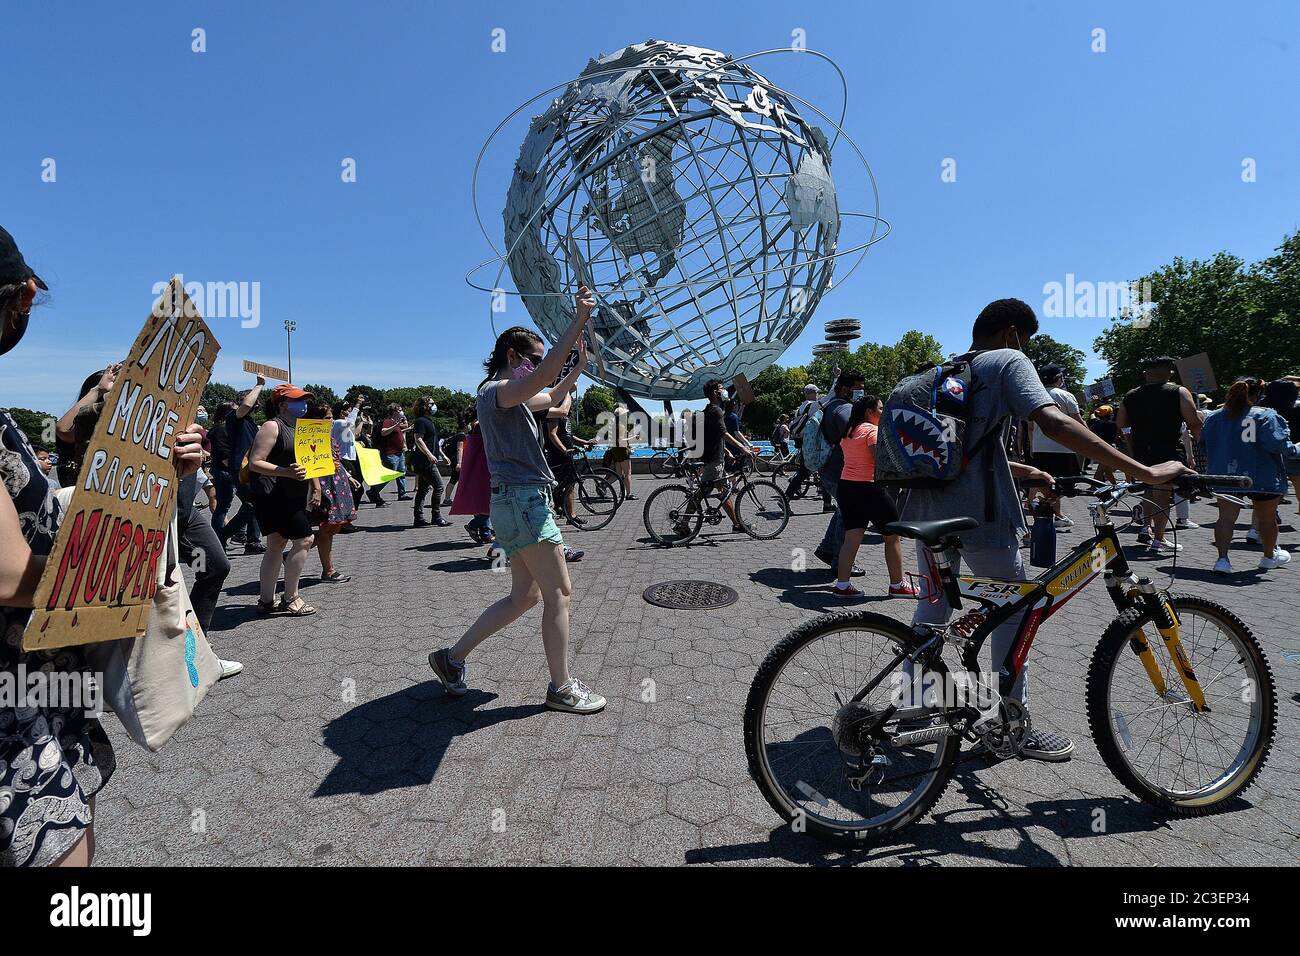 Marchers at Juneteenth celebration rally make their way to the Unisphere in Flushing Meadows-Corona Park in the borough of Queens, New York, June 19, 2020. Juneteenth is celebrated as a commemoration of the ending of slavery in the United States.   given on January 1, 1983, which was not enforced in Texas due to a lack of Union Troops Credit: Sipa USA/Alamy Live News Stock Photo